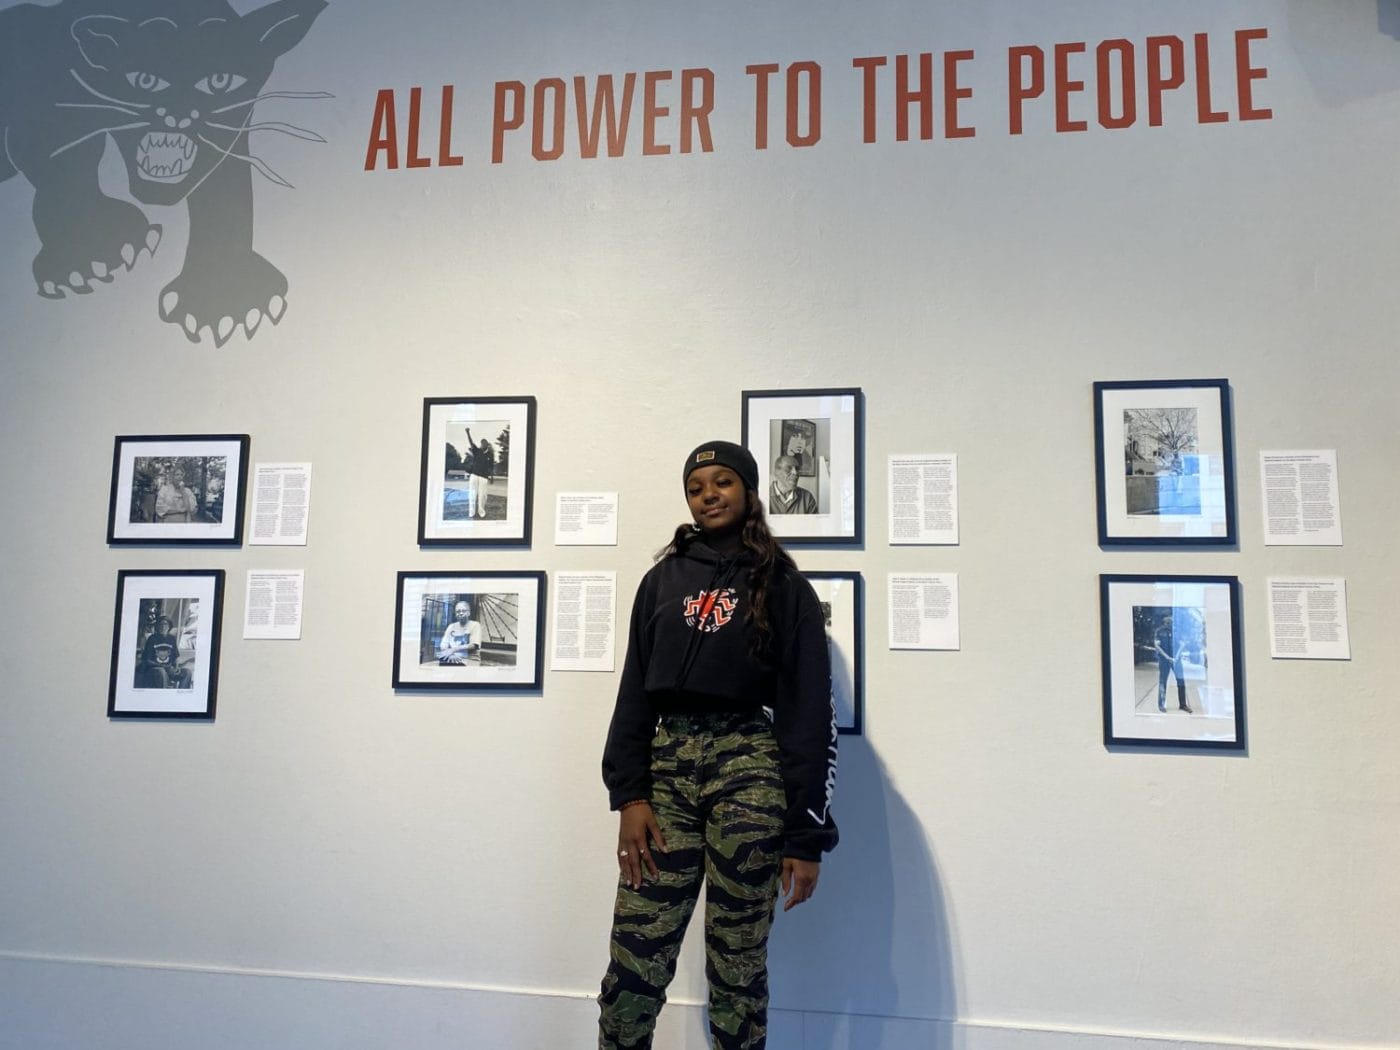 Black-Panther-Party-Museum-Bree-B.-Ali-‘All-Power-to-the-People-portraits-by-Tiffany-Caesar-1400x1050, The People’s Narrative: The Black Panther Party Museum in Oakland, Culture Currents Local News & Views 